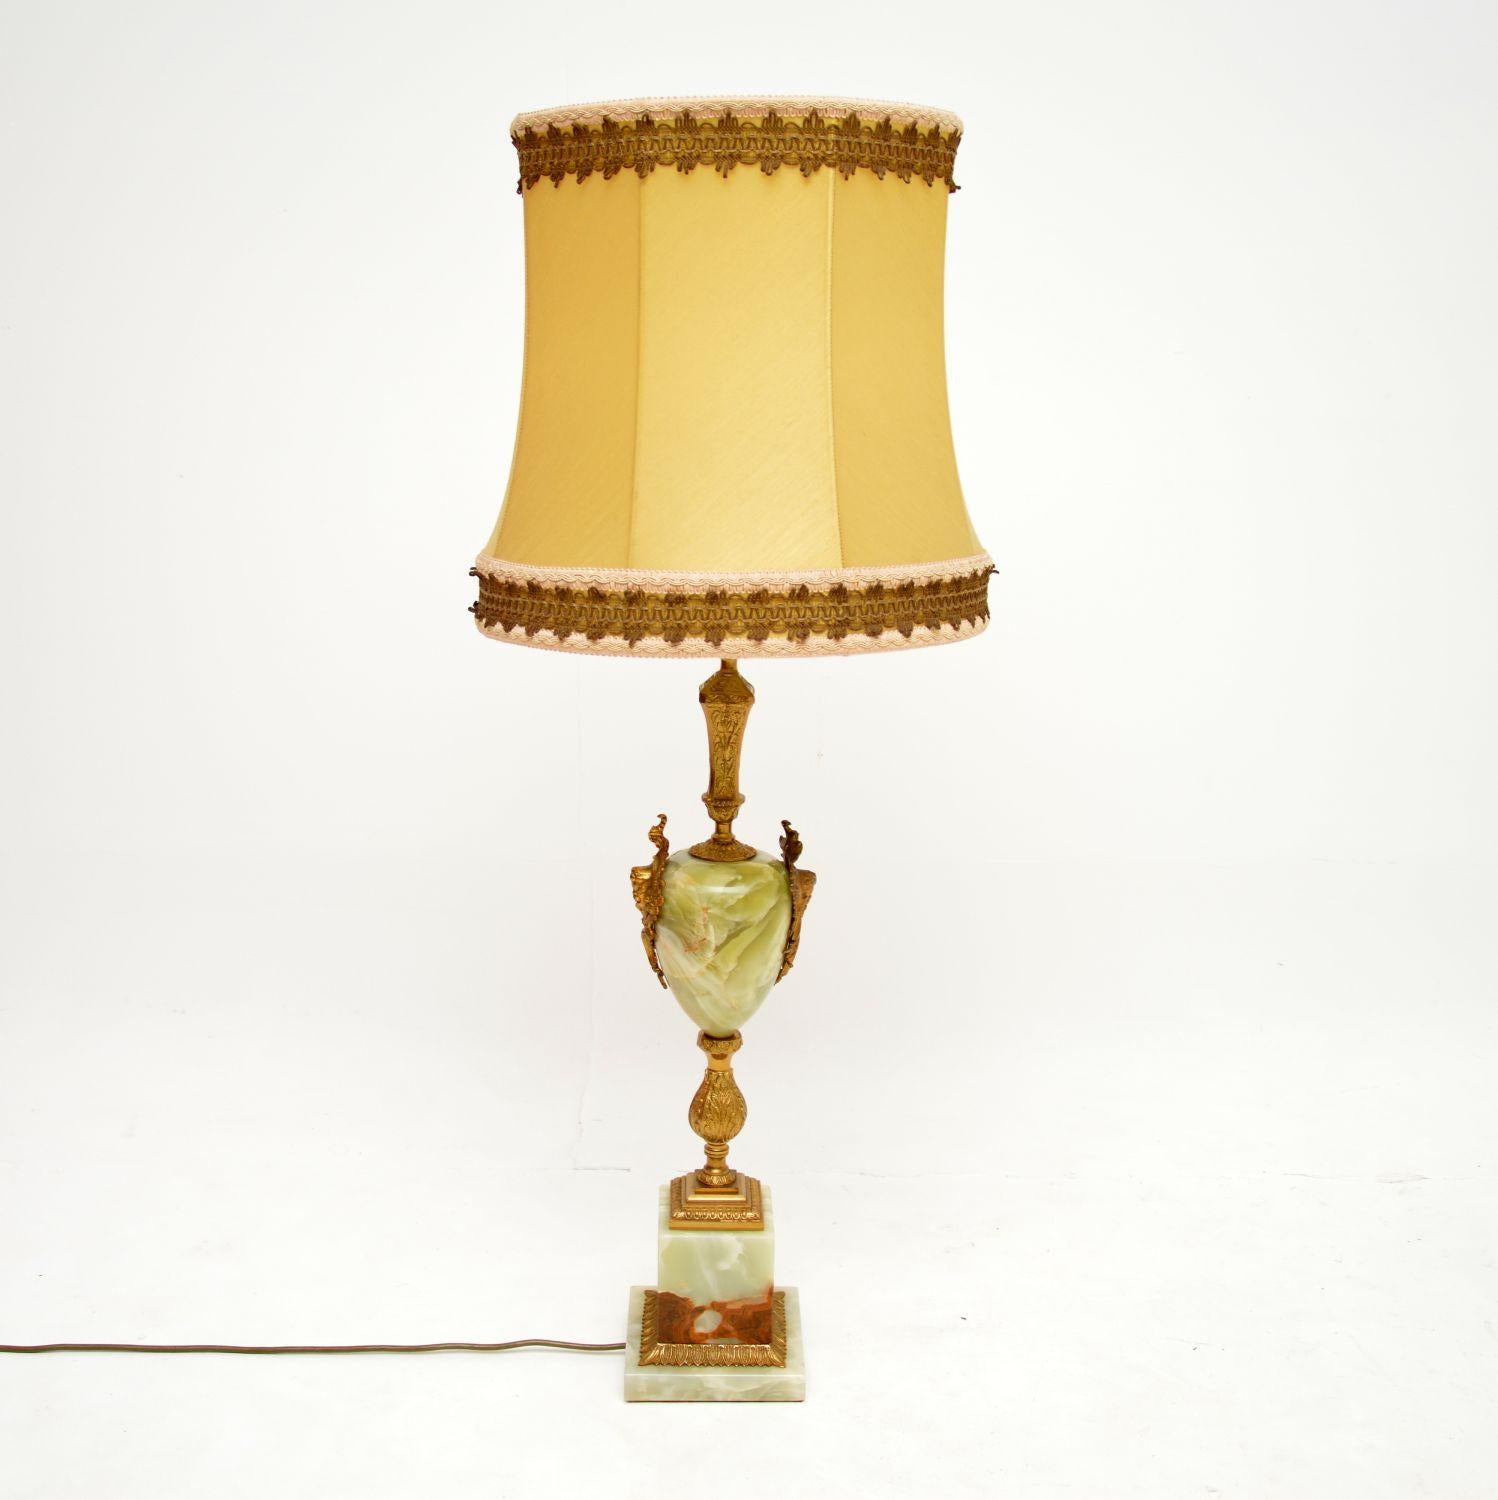 A large and impressive antique French table lamp in onyx and gilt metal. This was made in France and dates from around the 1930’s.

It is of super quality, with beautiful colouration to the onyx and beautiful, intricate details to the gilt metal